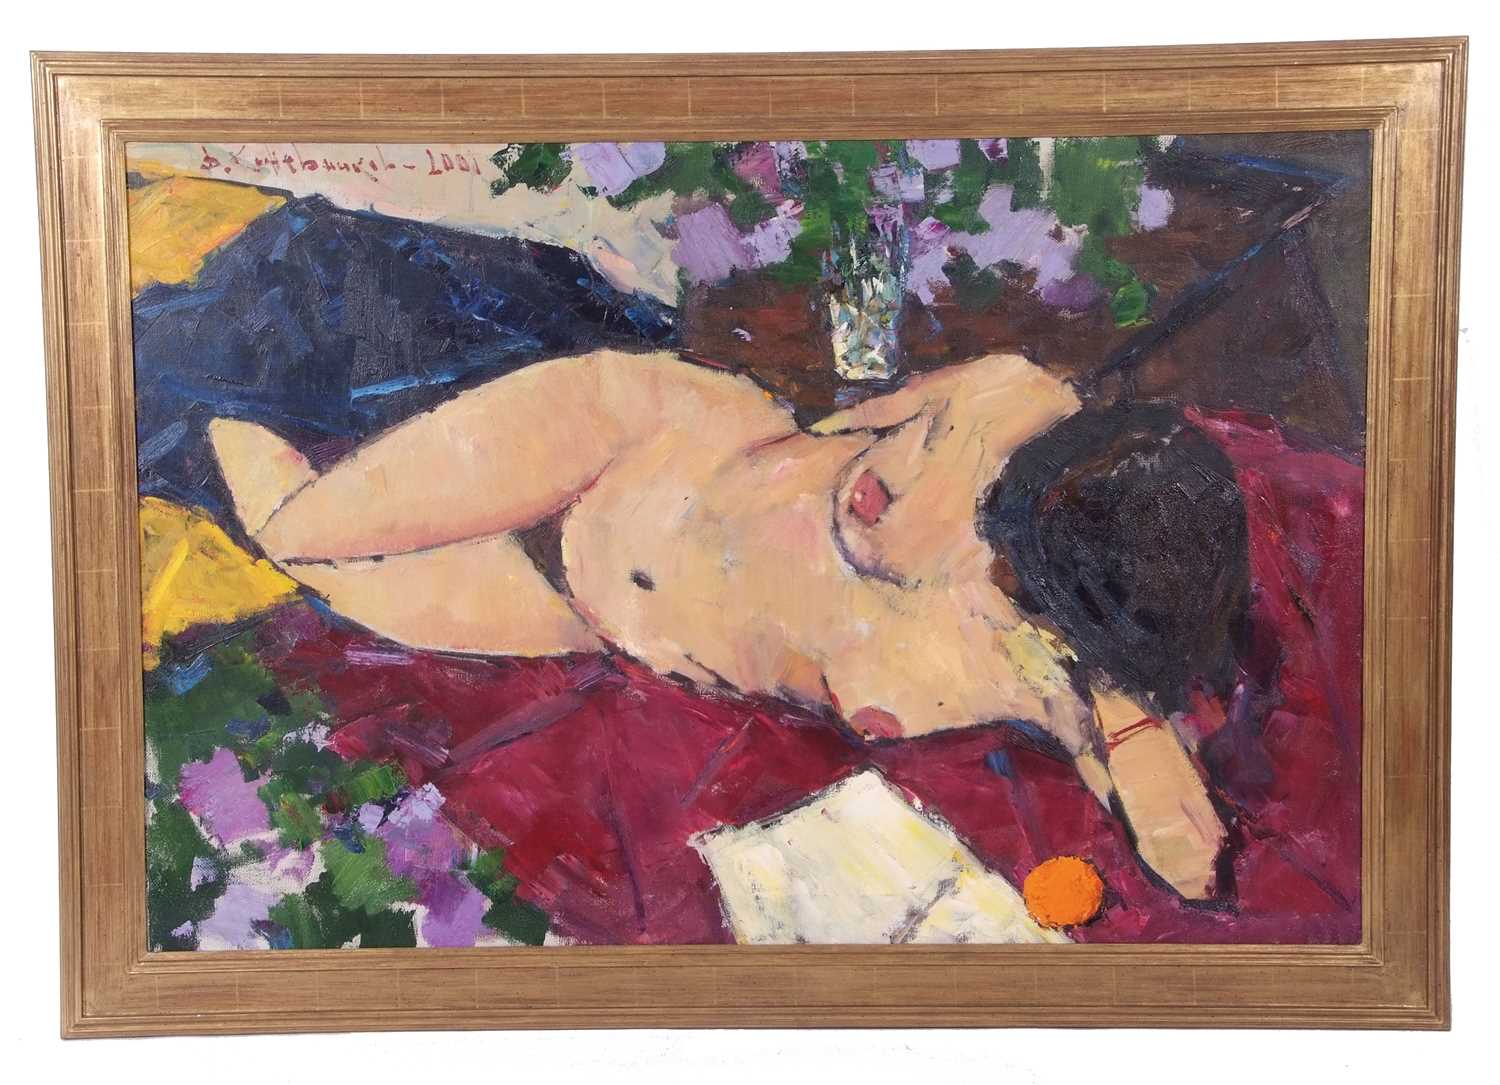 Russian School, Contemporary, A Reclining Female Nude , Oil on canvas, indistinctly signed. - Image 2 of 3